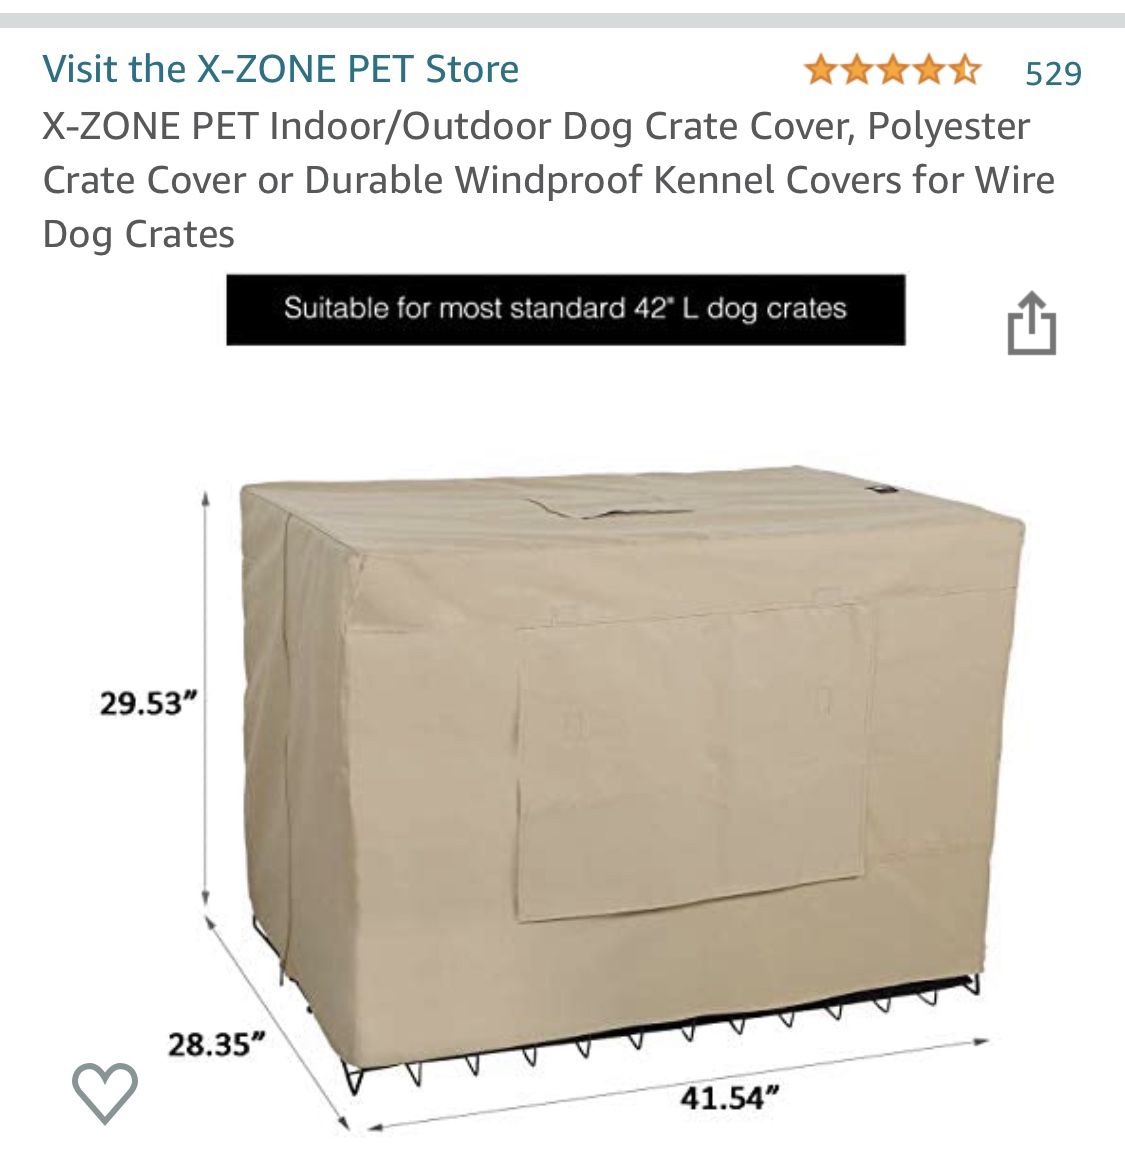 42” Pet Crate Cover